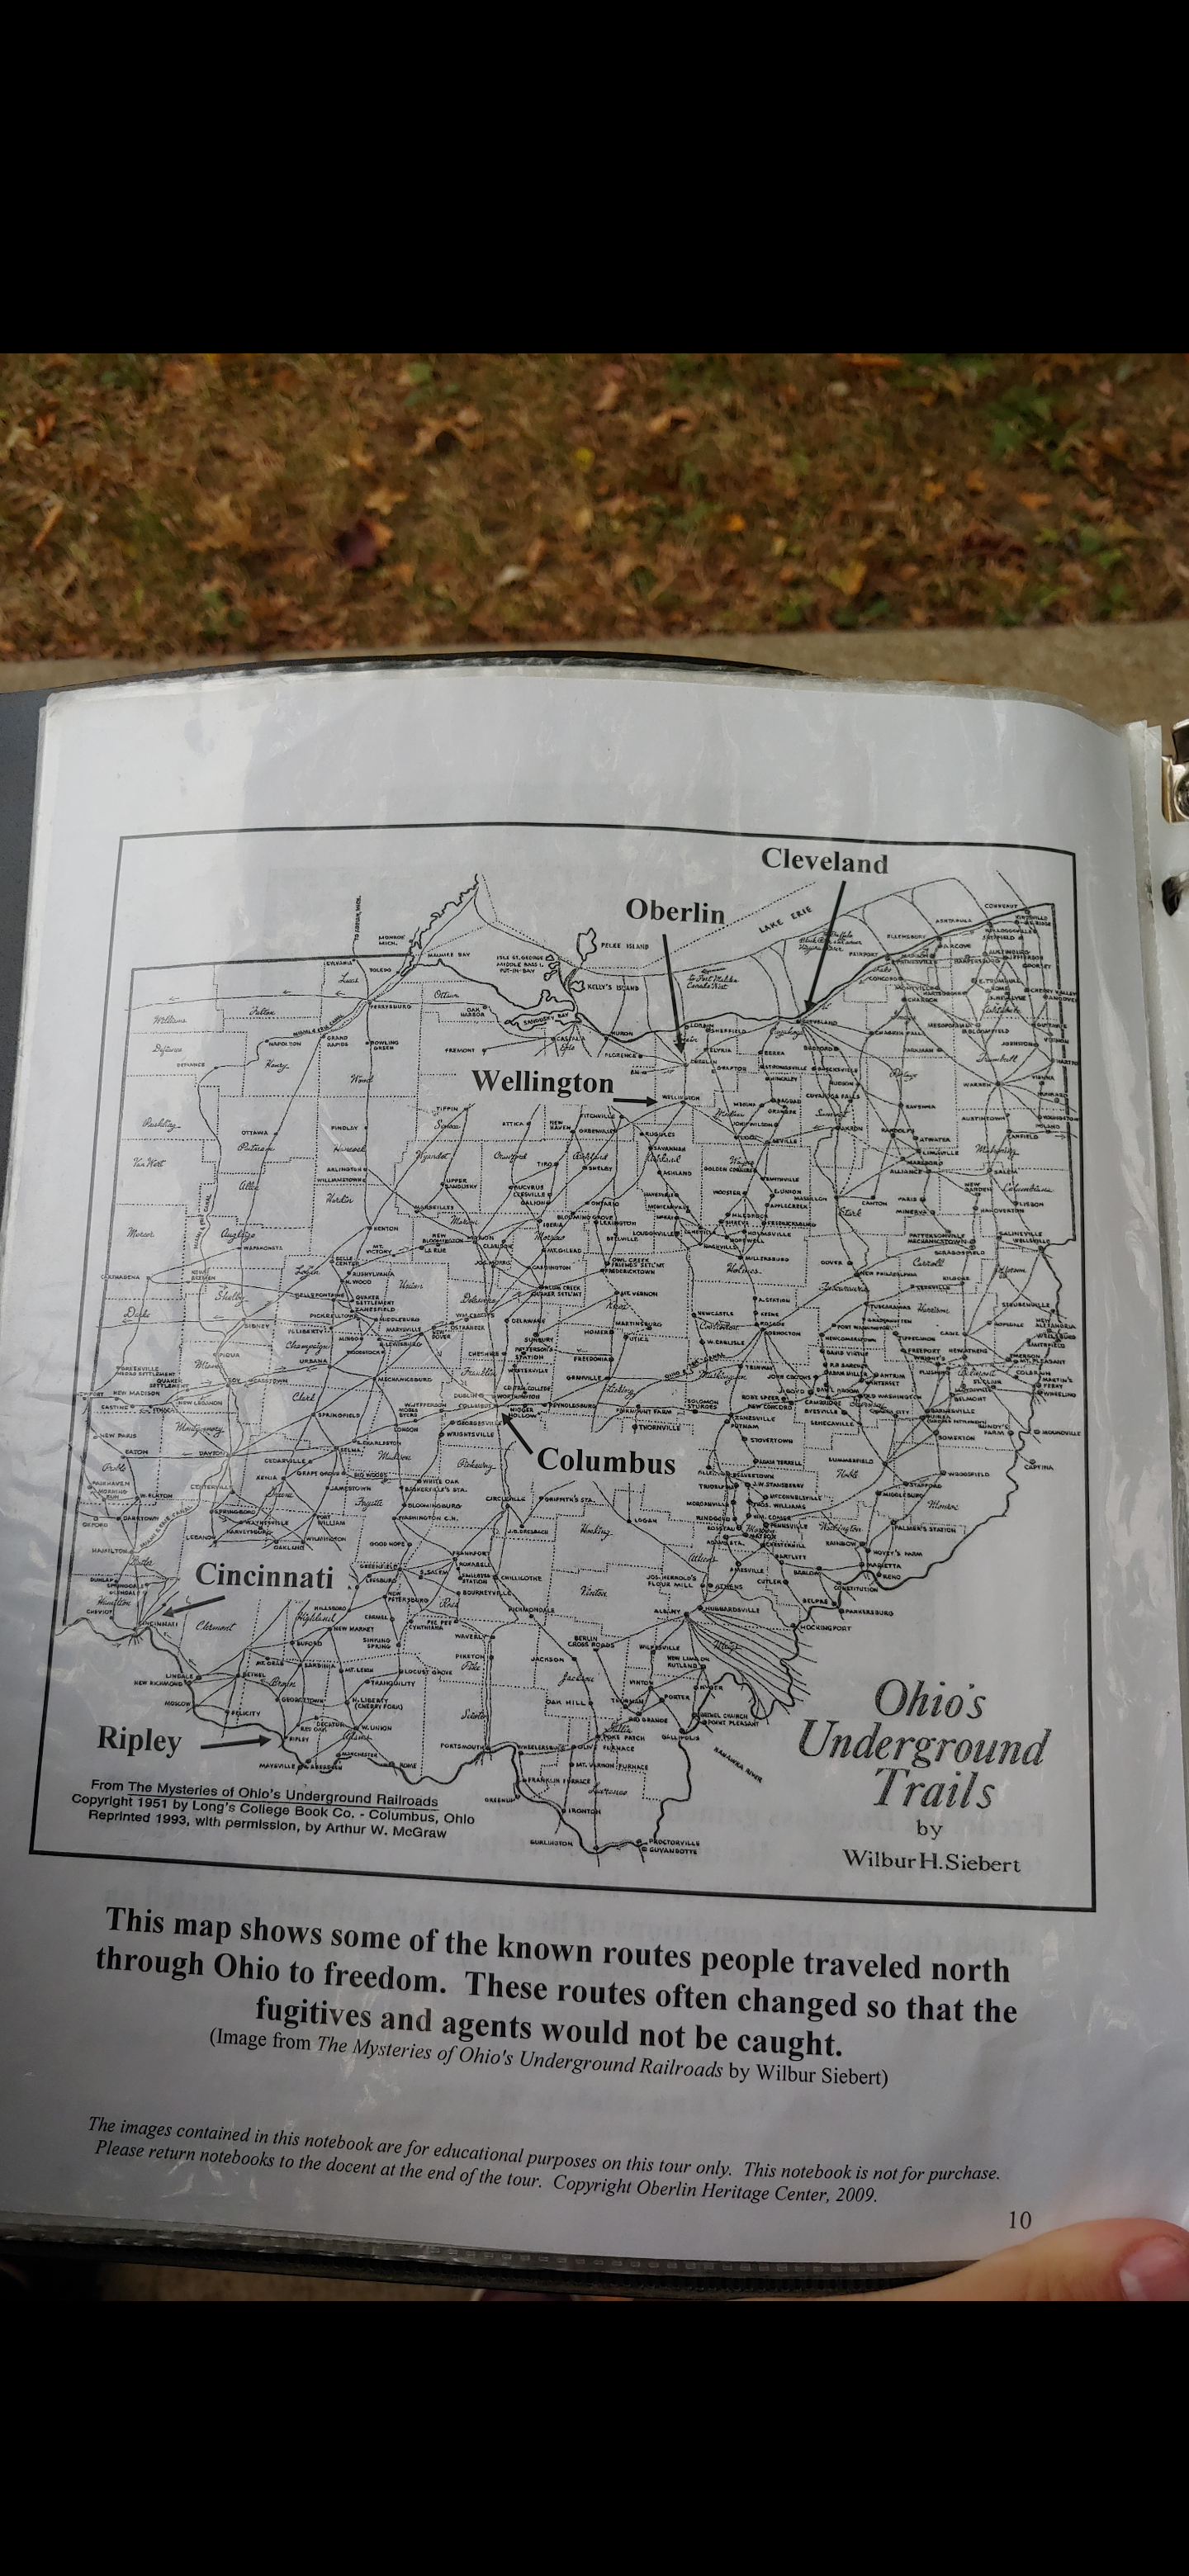 This is an image of the known routes people travelled to get to freedom. These routes often changed and varied to remain secret. Regardless, the paths would have people gather in Ohio, specifically Oberlin, while other lines show the trip into Canada.